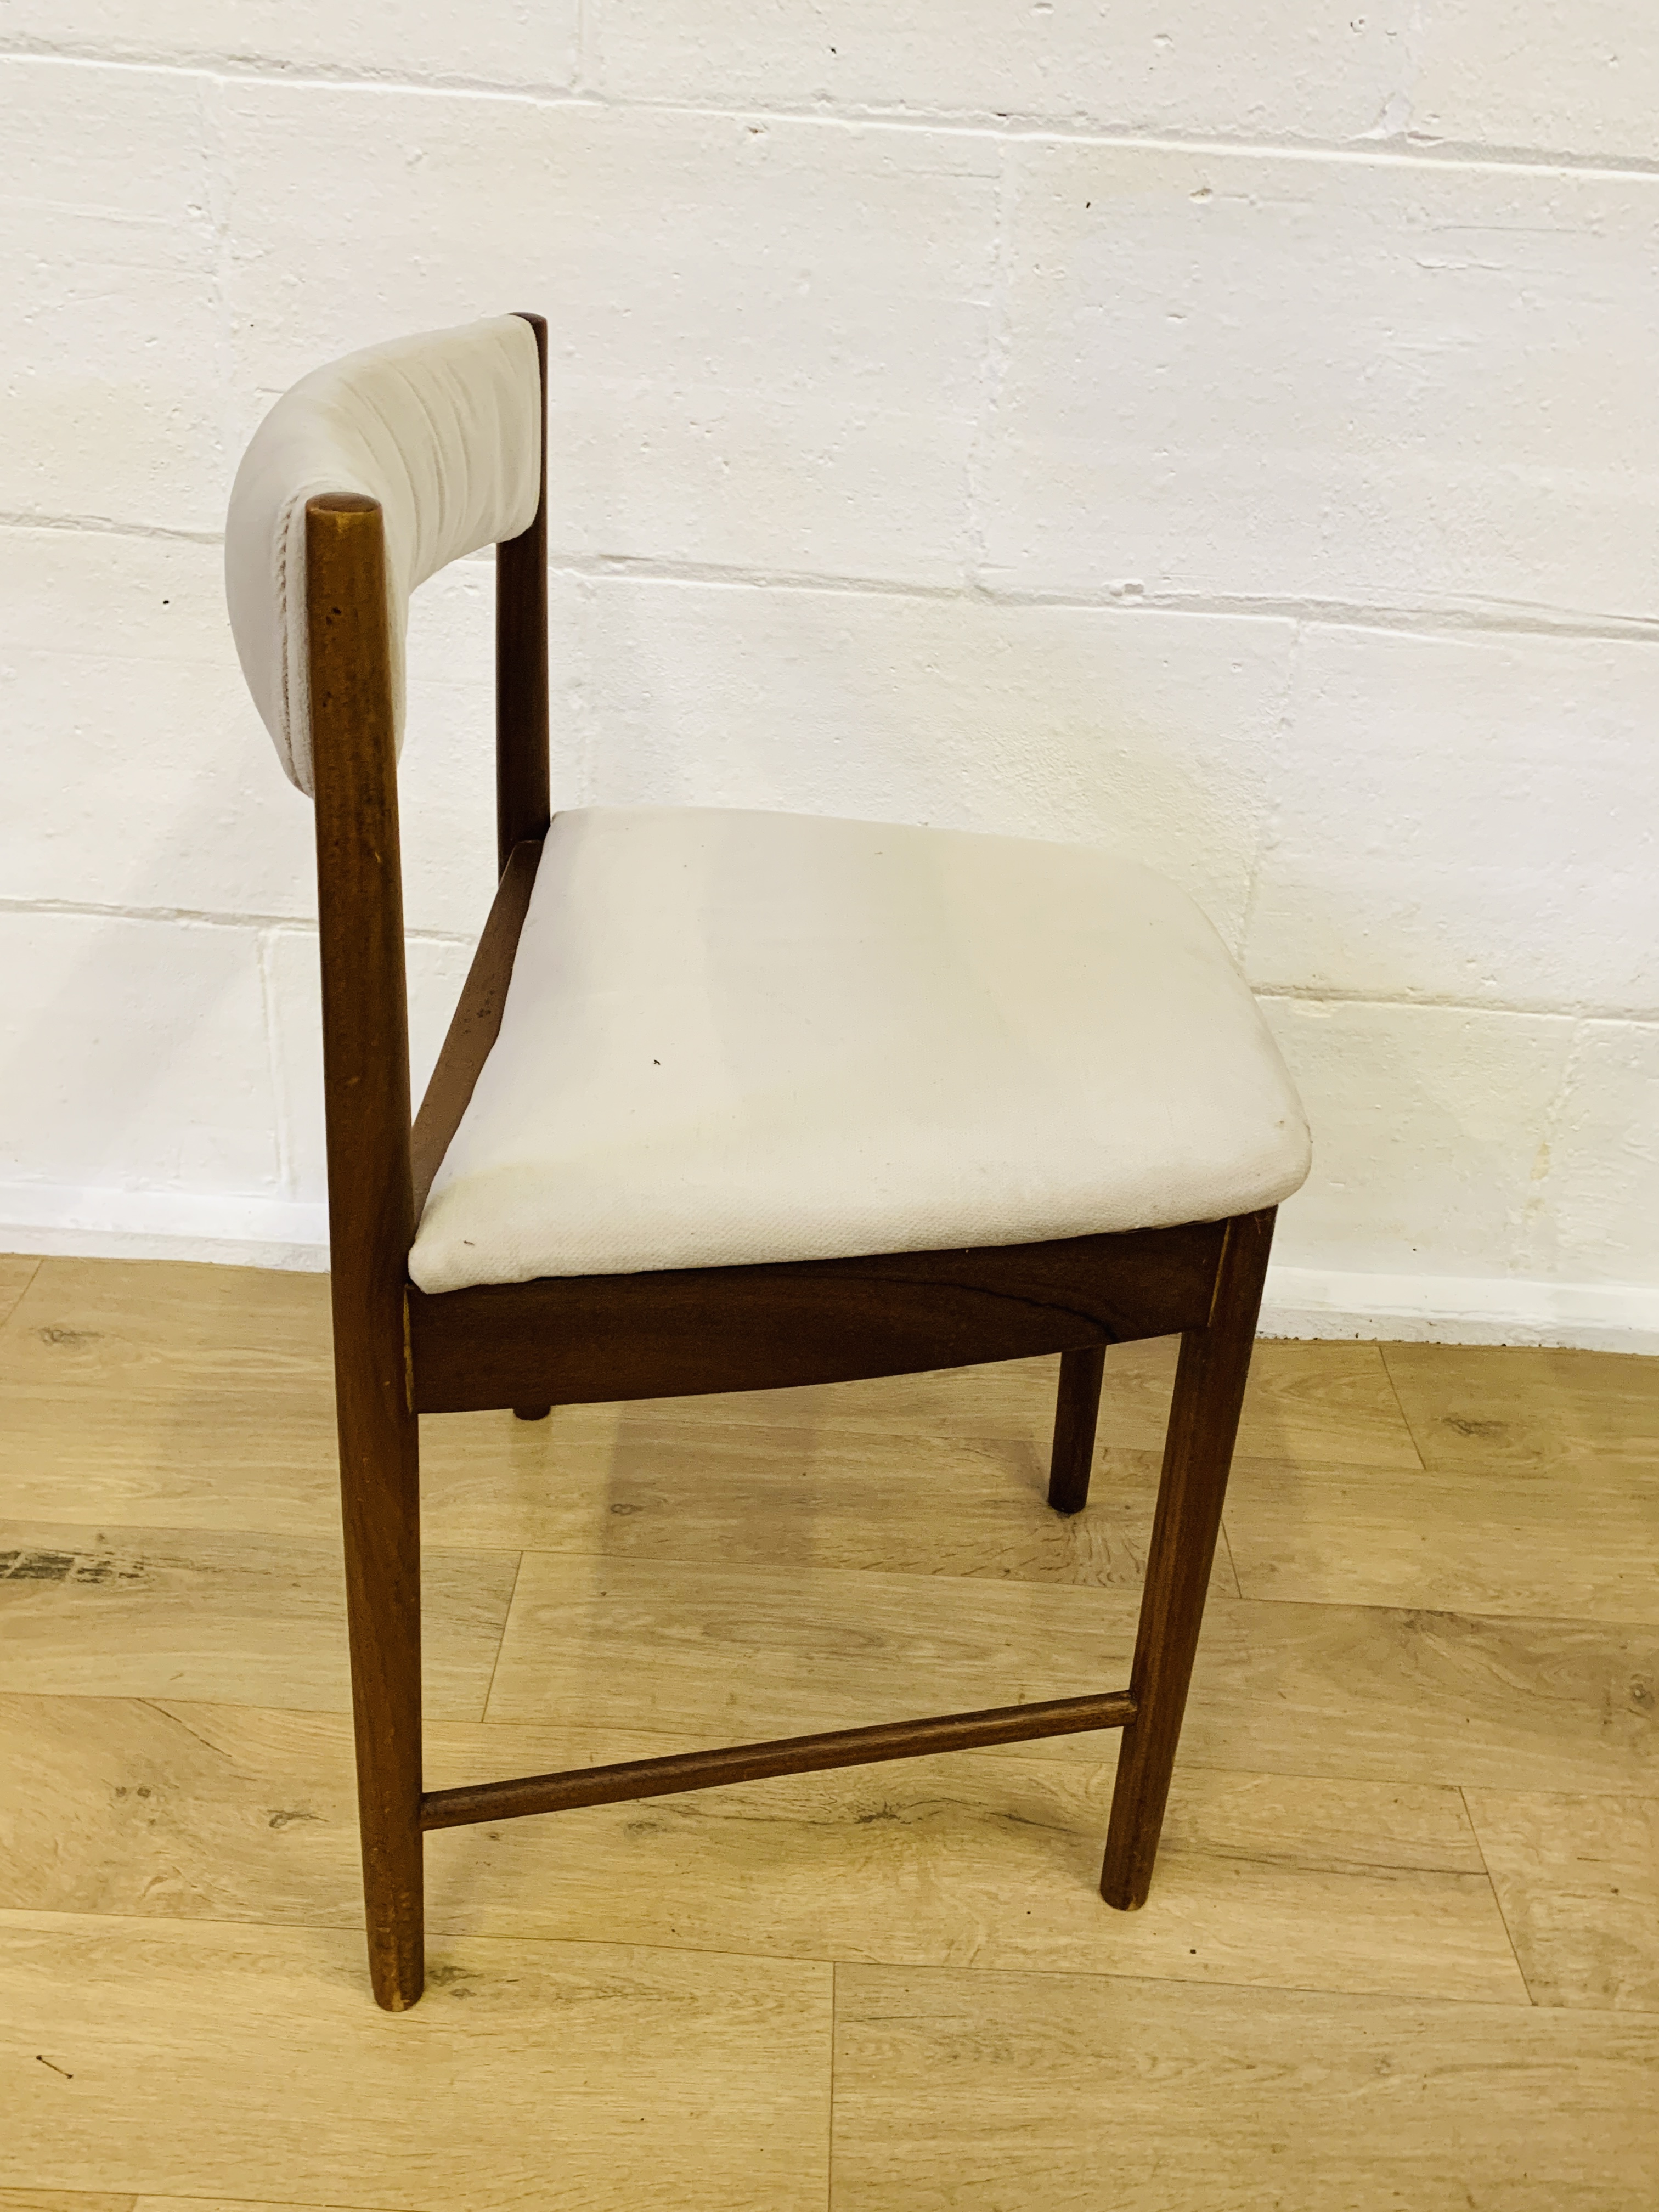 Four teak dining chairs - Image 4 of 4